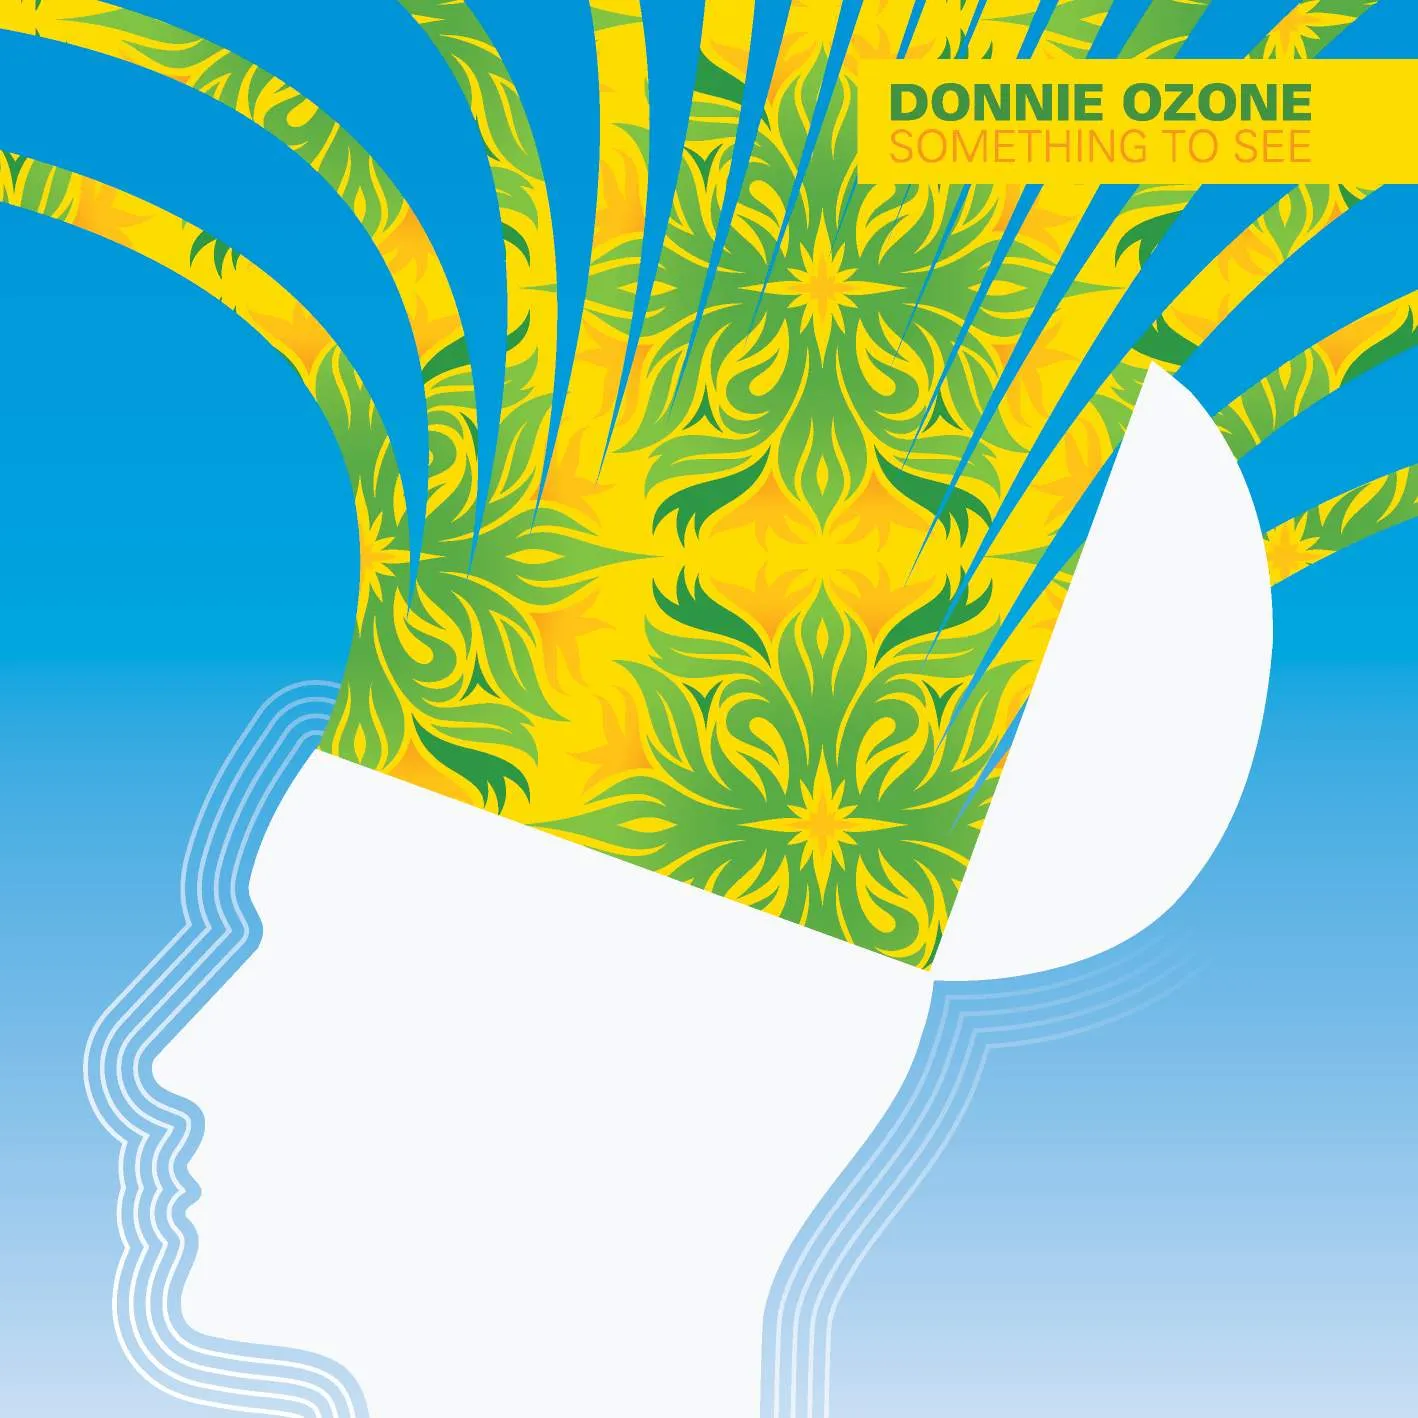 Album cover for “Something To See” by Donnie Ozone